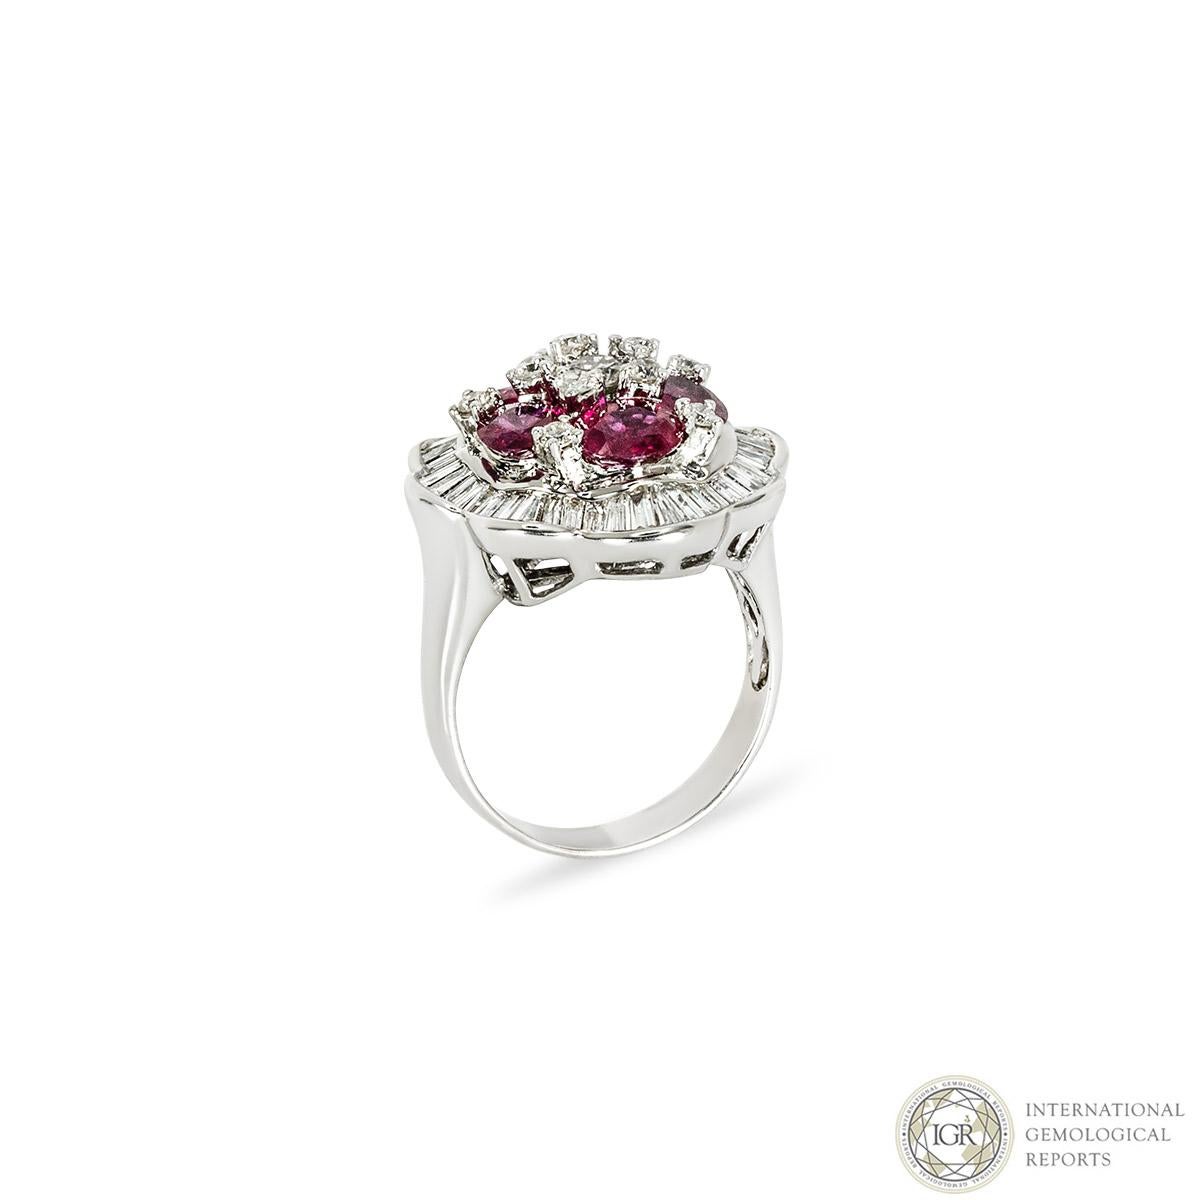 A beautiful 18k white gold ruby and diamond dress ring. The ring comprises of 6 mixed oval cut rubies complemented with baguette and round brilliant cut diamonds. The rubies have an approximate total weight of 3.50ct, with a strong pinkish-red hue